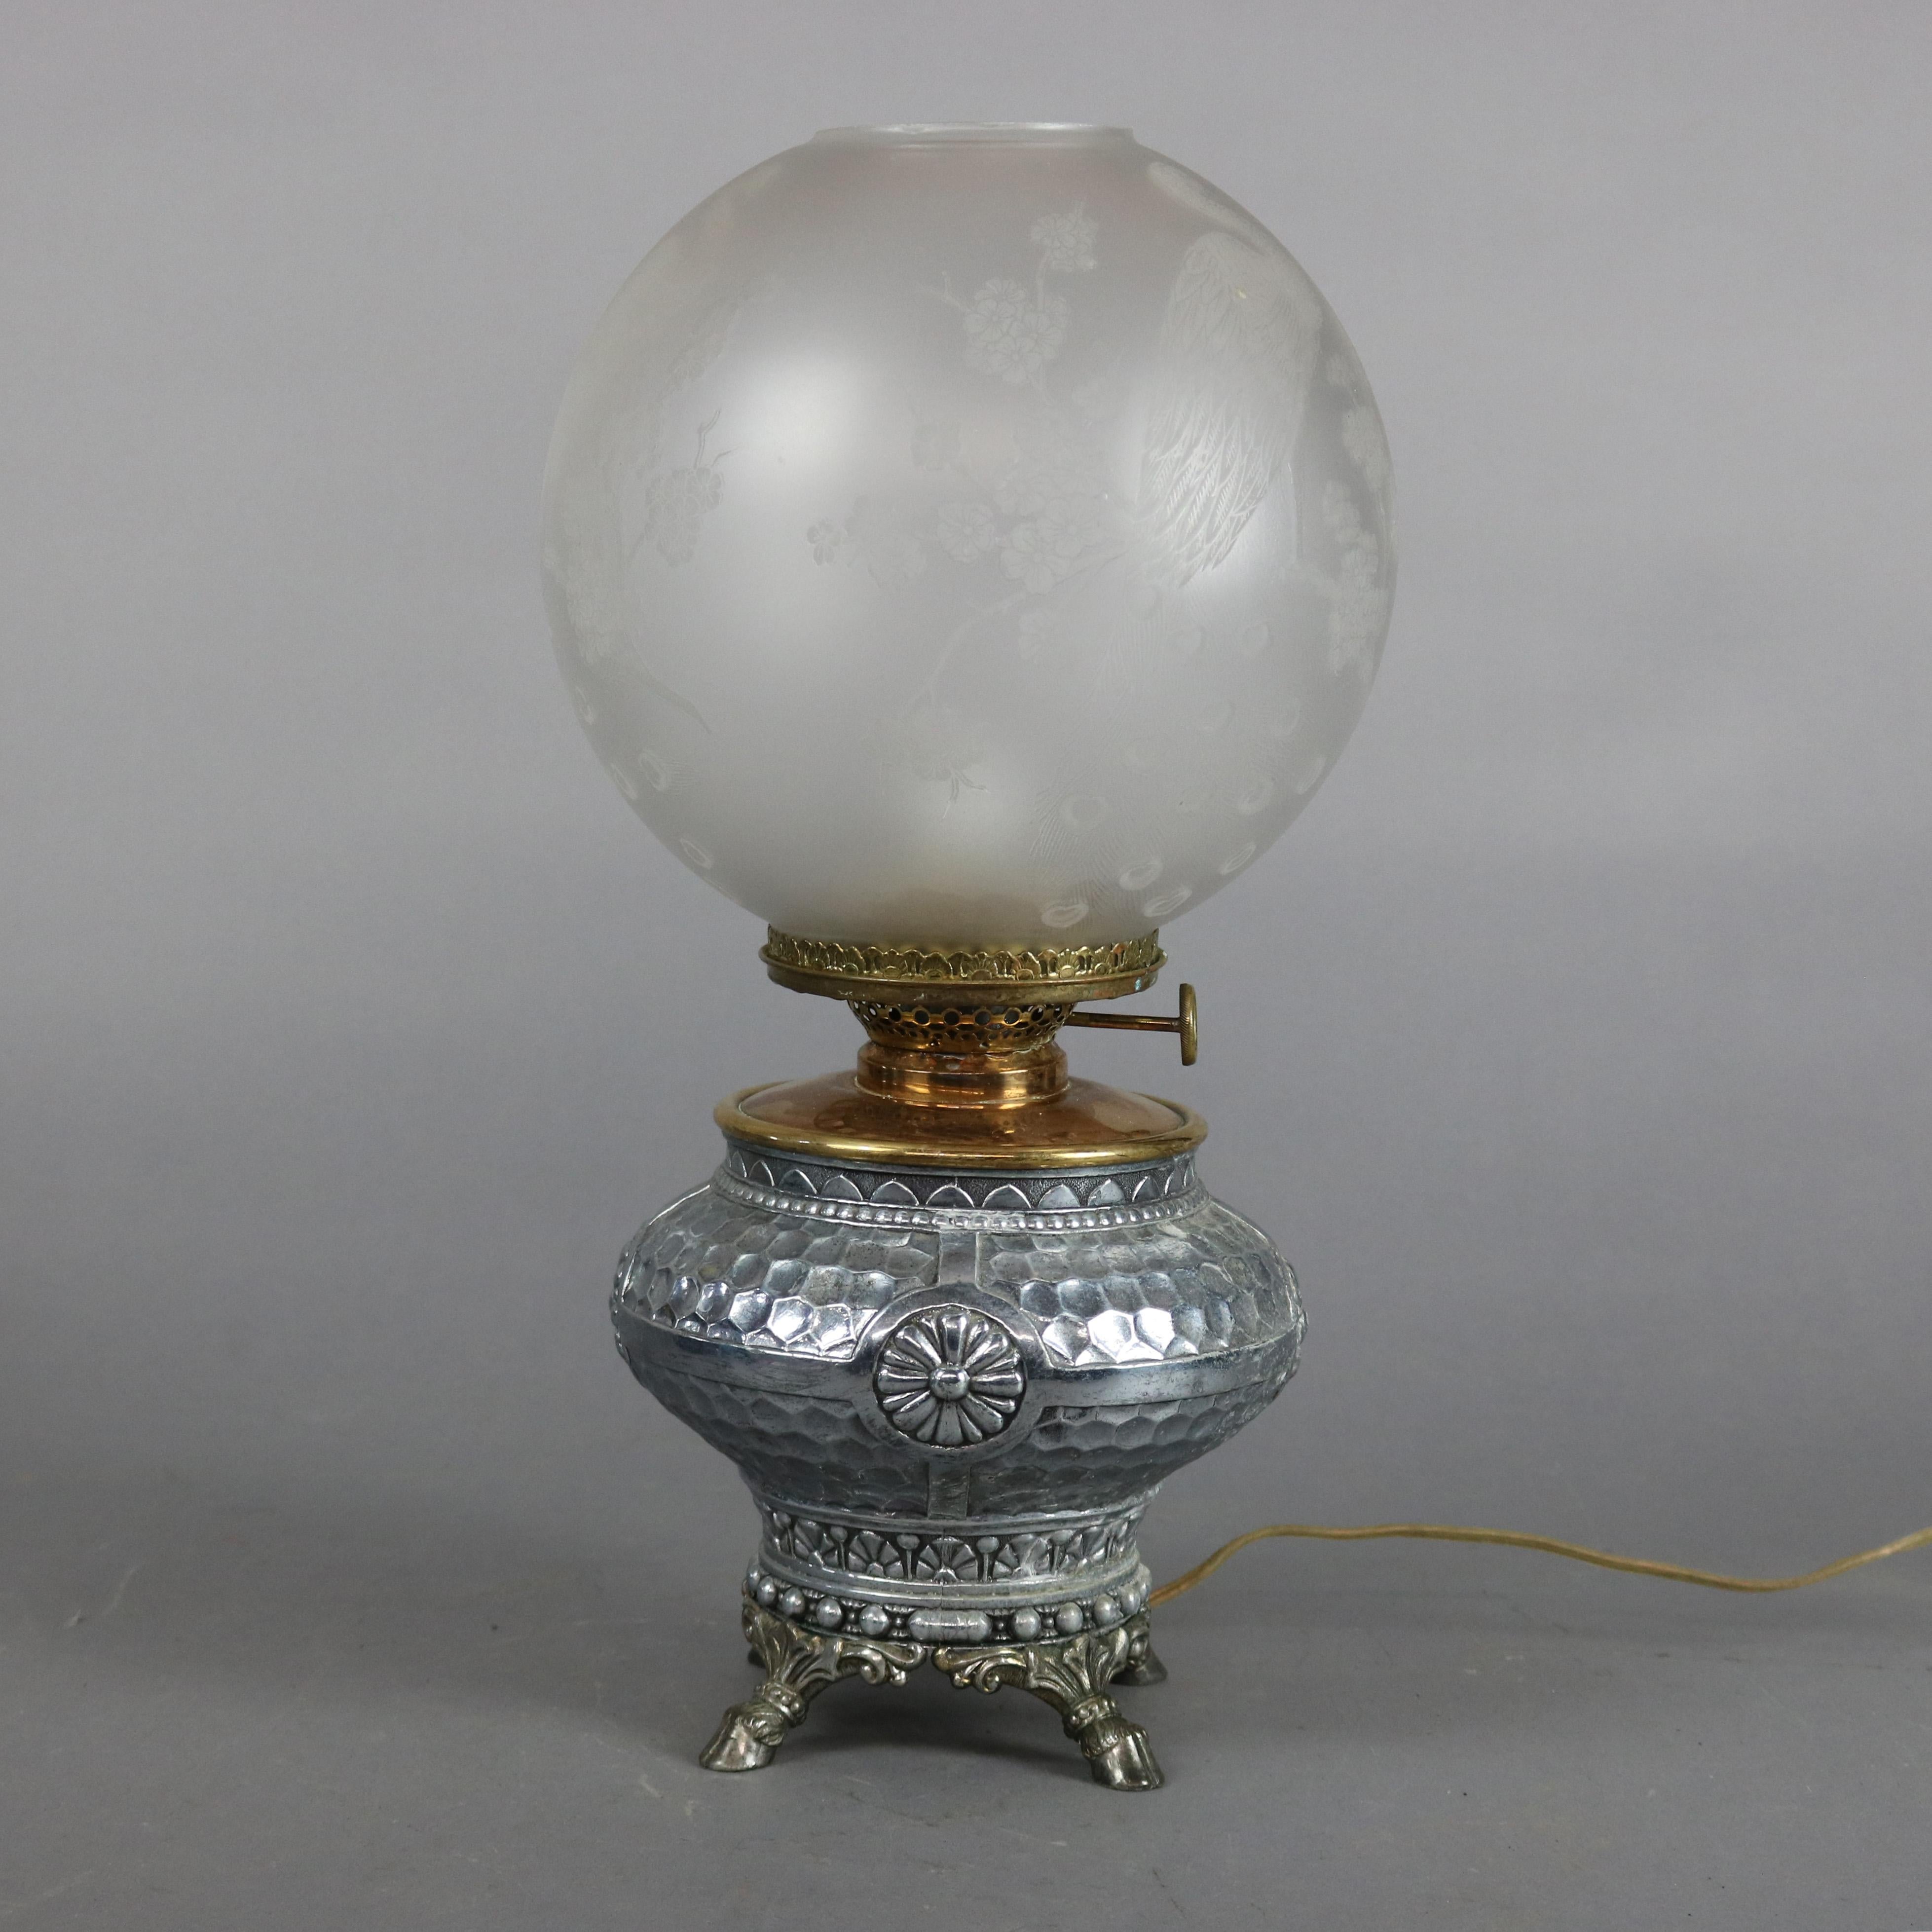 An electrified Aesthetic Movement banquet oil lamp offers etched globe shade with peacock over hammered silver plate base with stylized floral decoration and footed, electrified, circa 1870.

***DELIVERY NOTICE – Due to COVID-19 we are employing